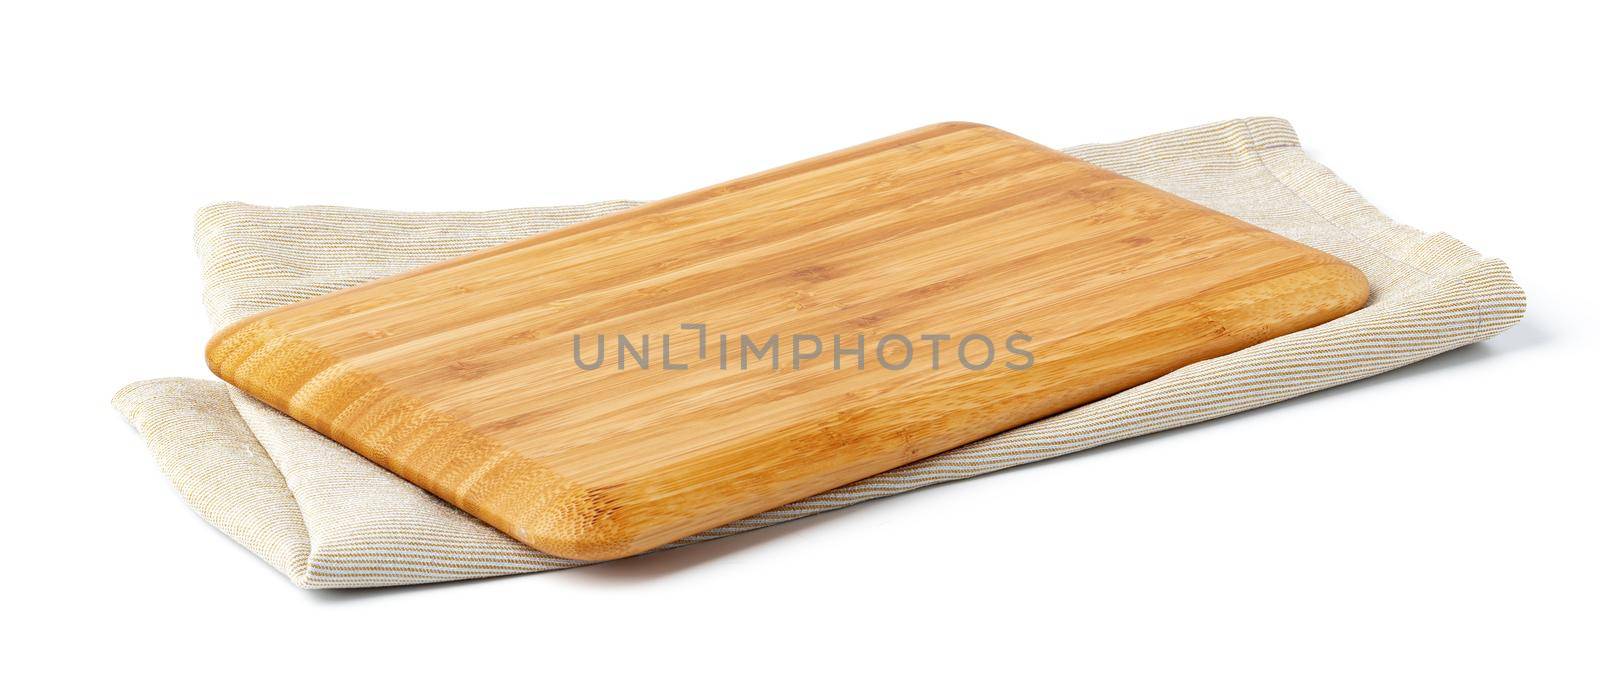 Wooden board and tablecloth isolated on white background